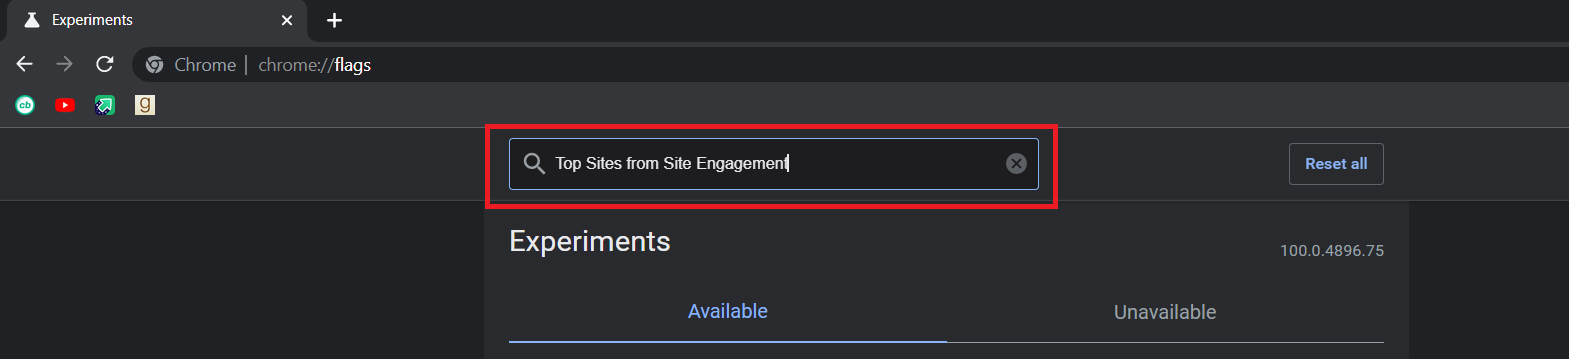 Search bar in Experiments page